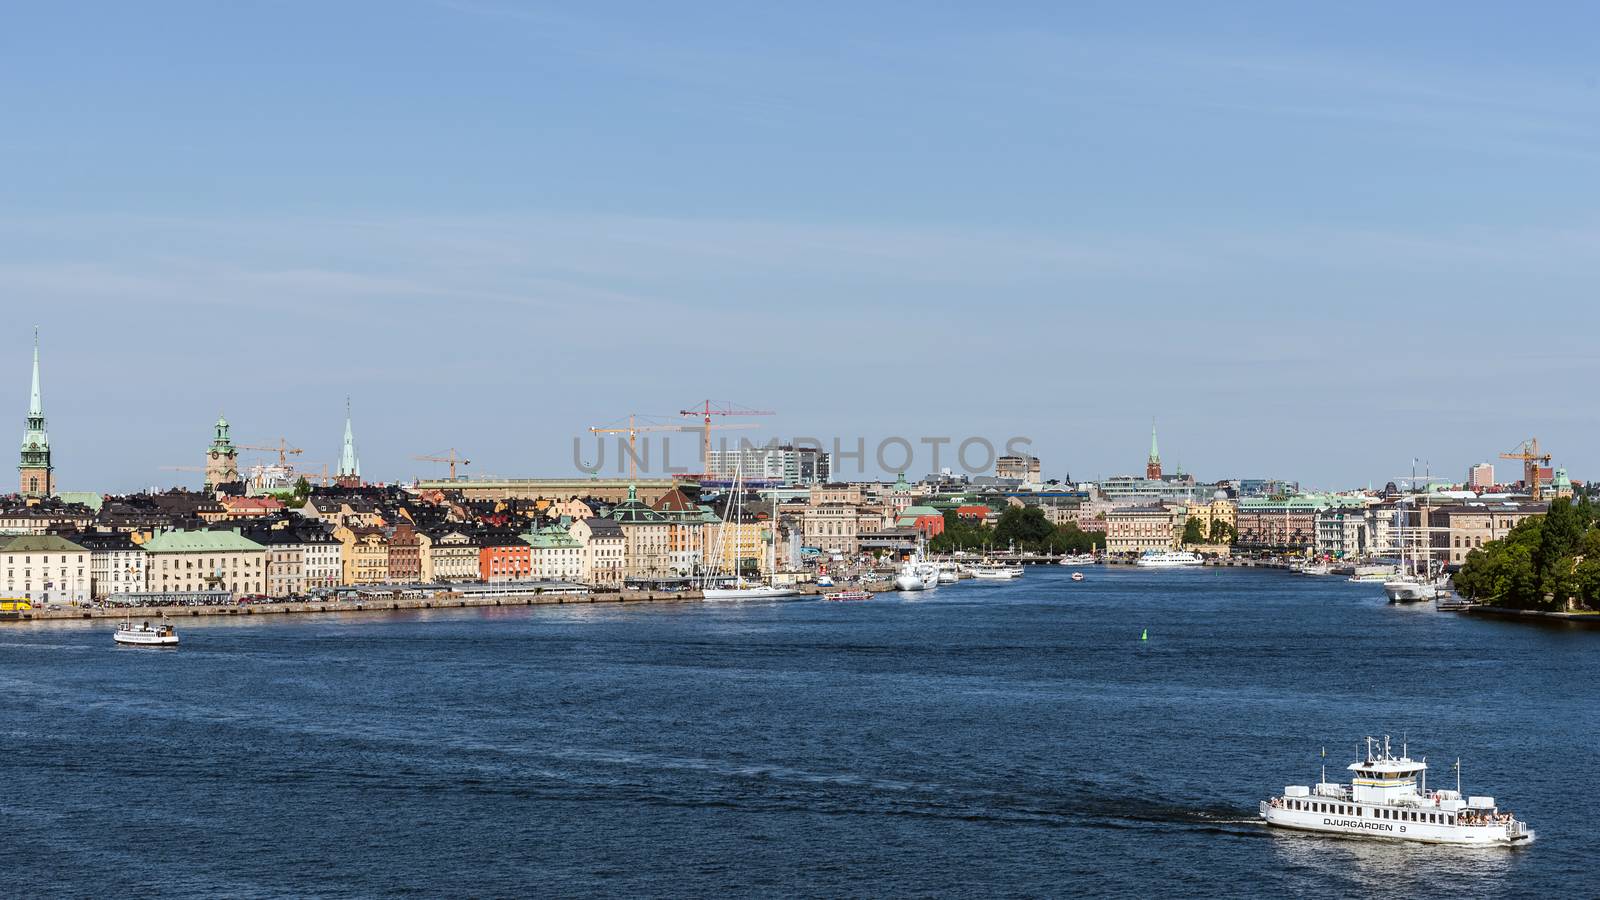 Overall view on Gamla stan (The Old Town). The town dates back to the 13th century and is the main attraction of the city with a rich collection of medieval architecture.